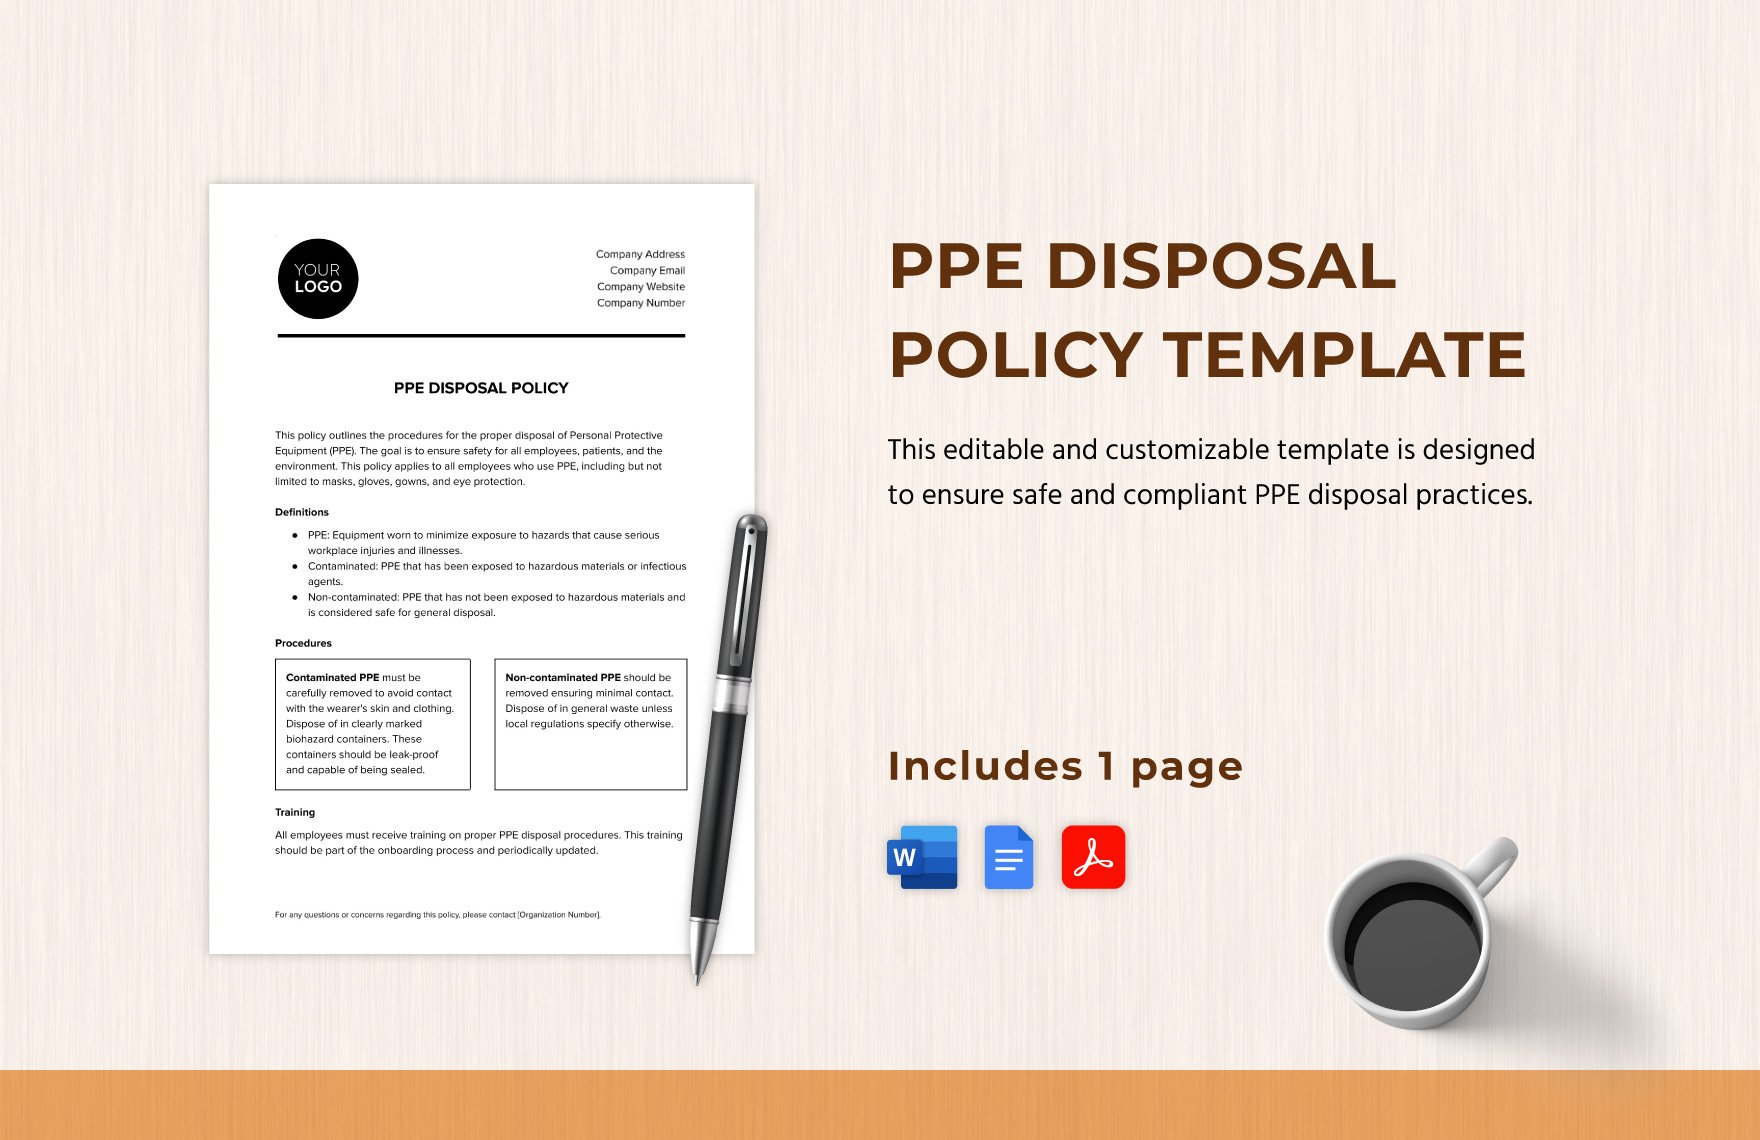 PPE Disposal Policy Template